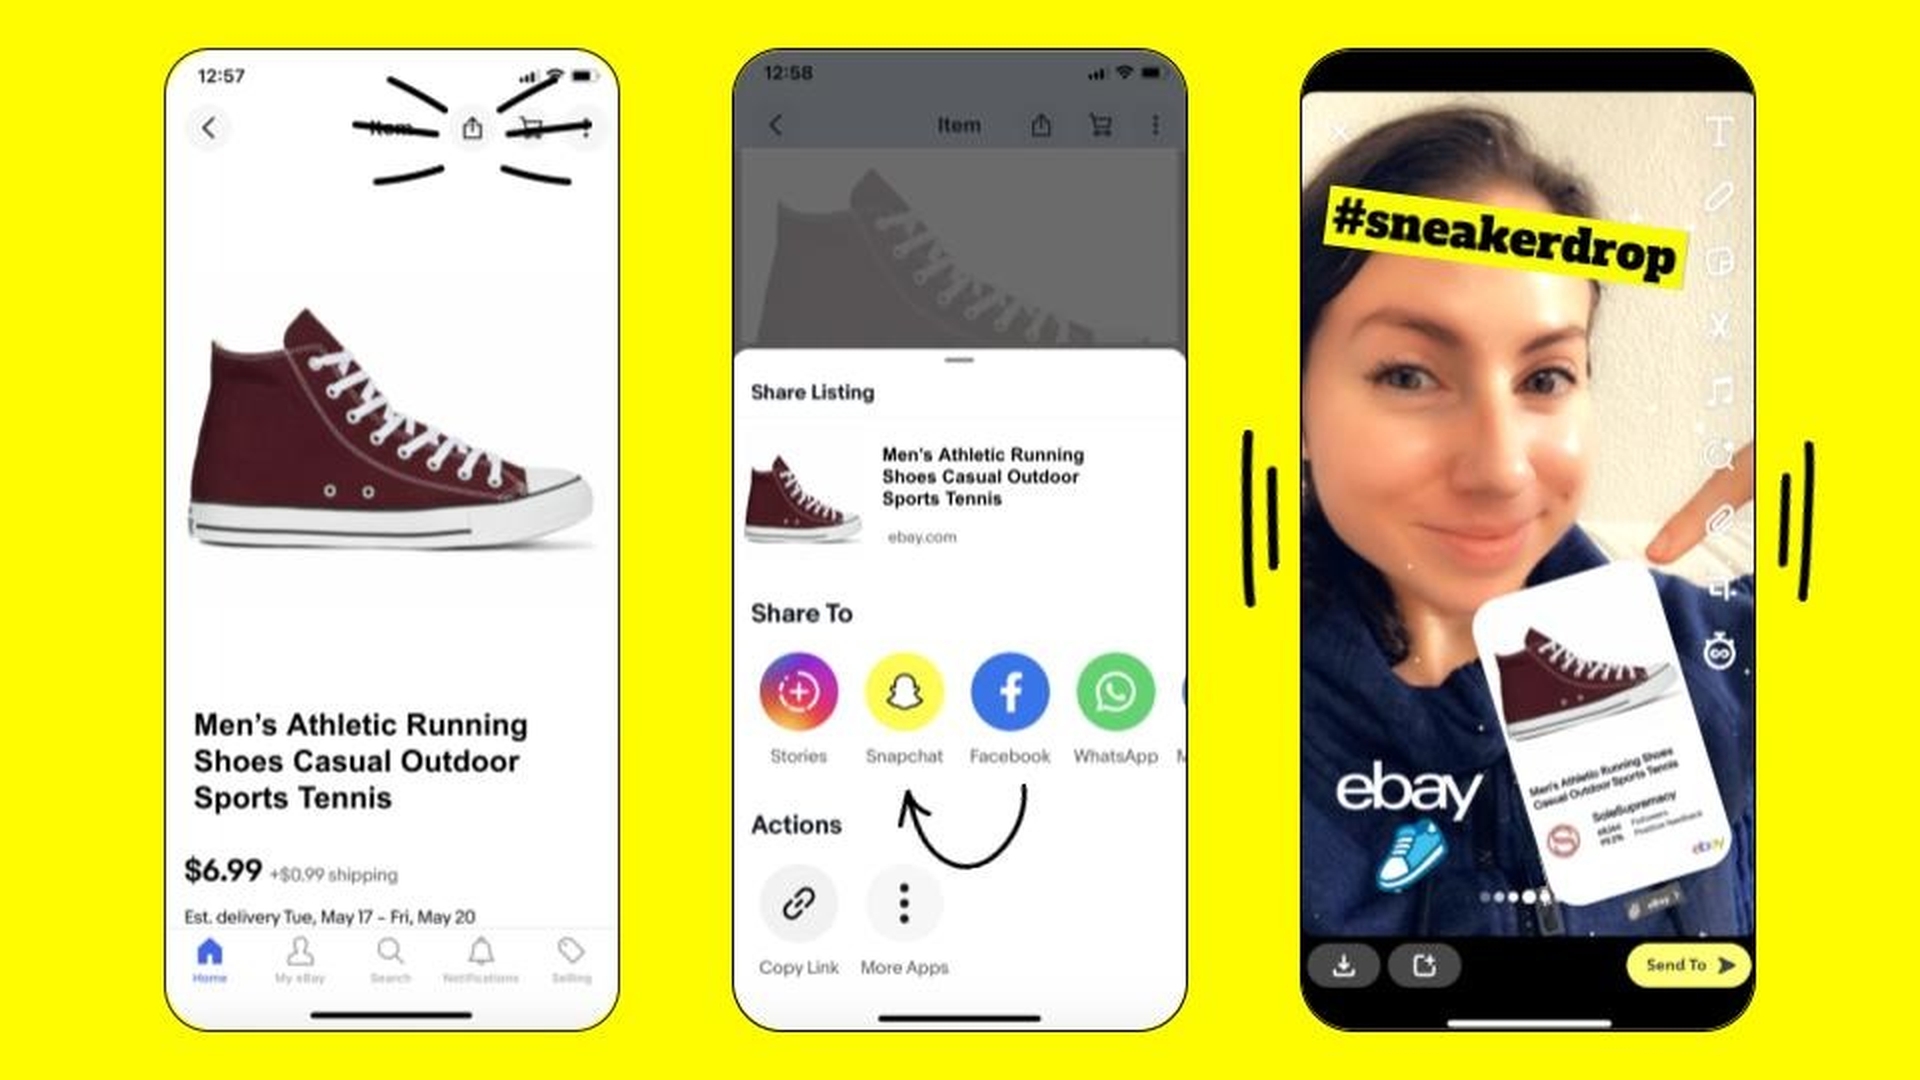 In this article, we are going to cover how to add eBay listing on Snapchat, so you can share your listings with your Snapchat connections.